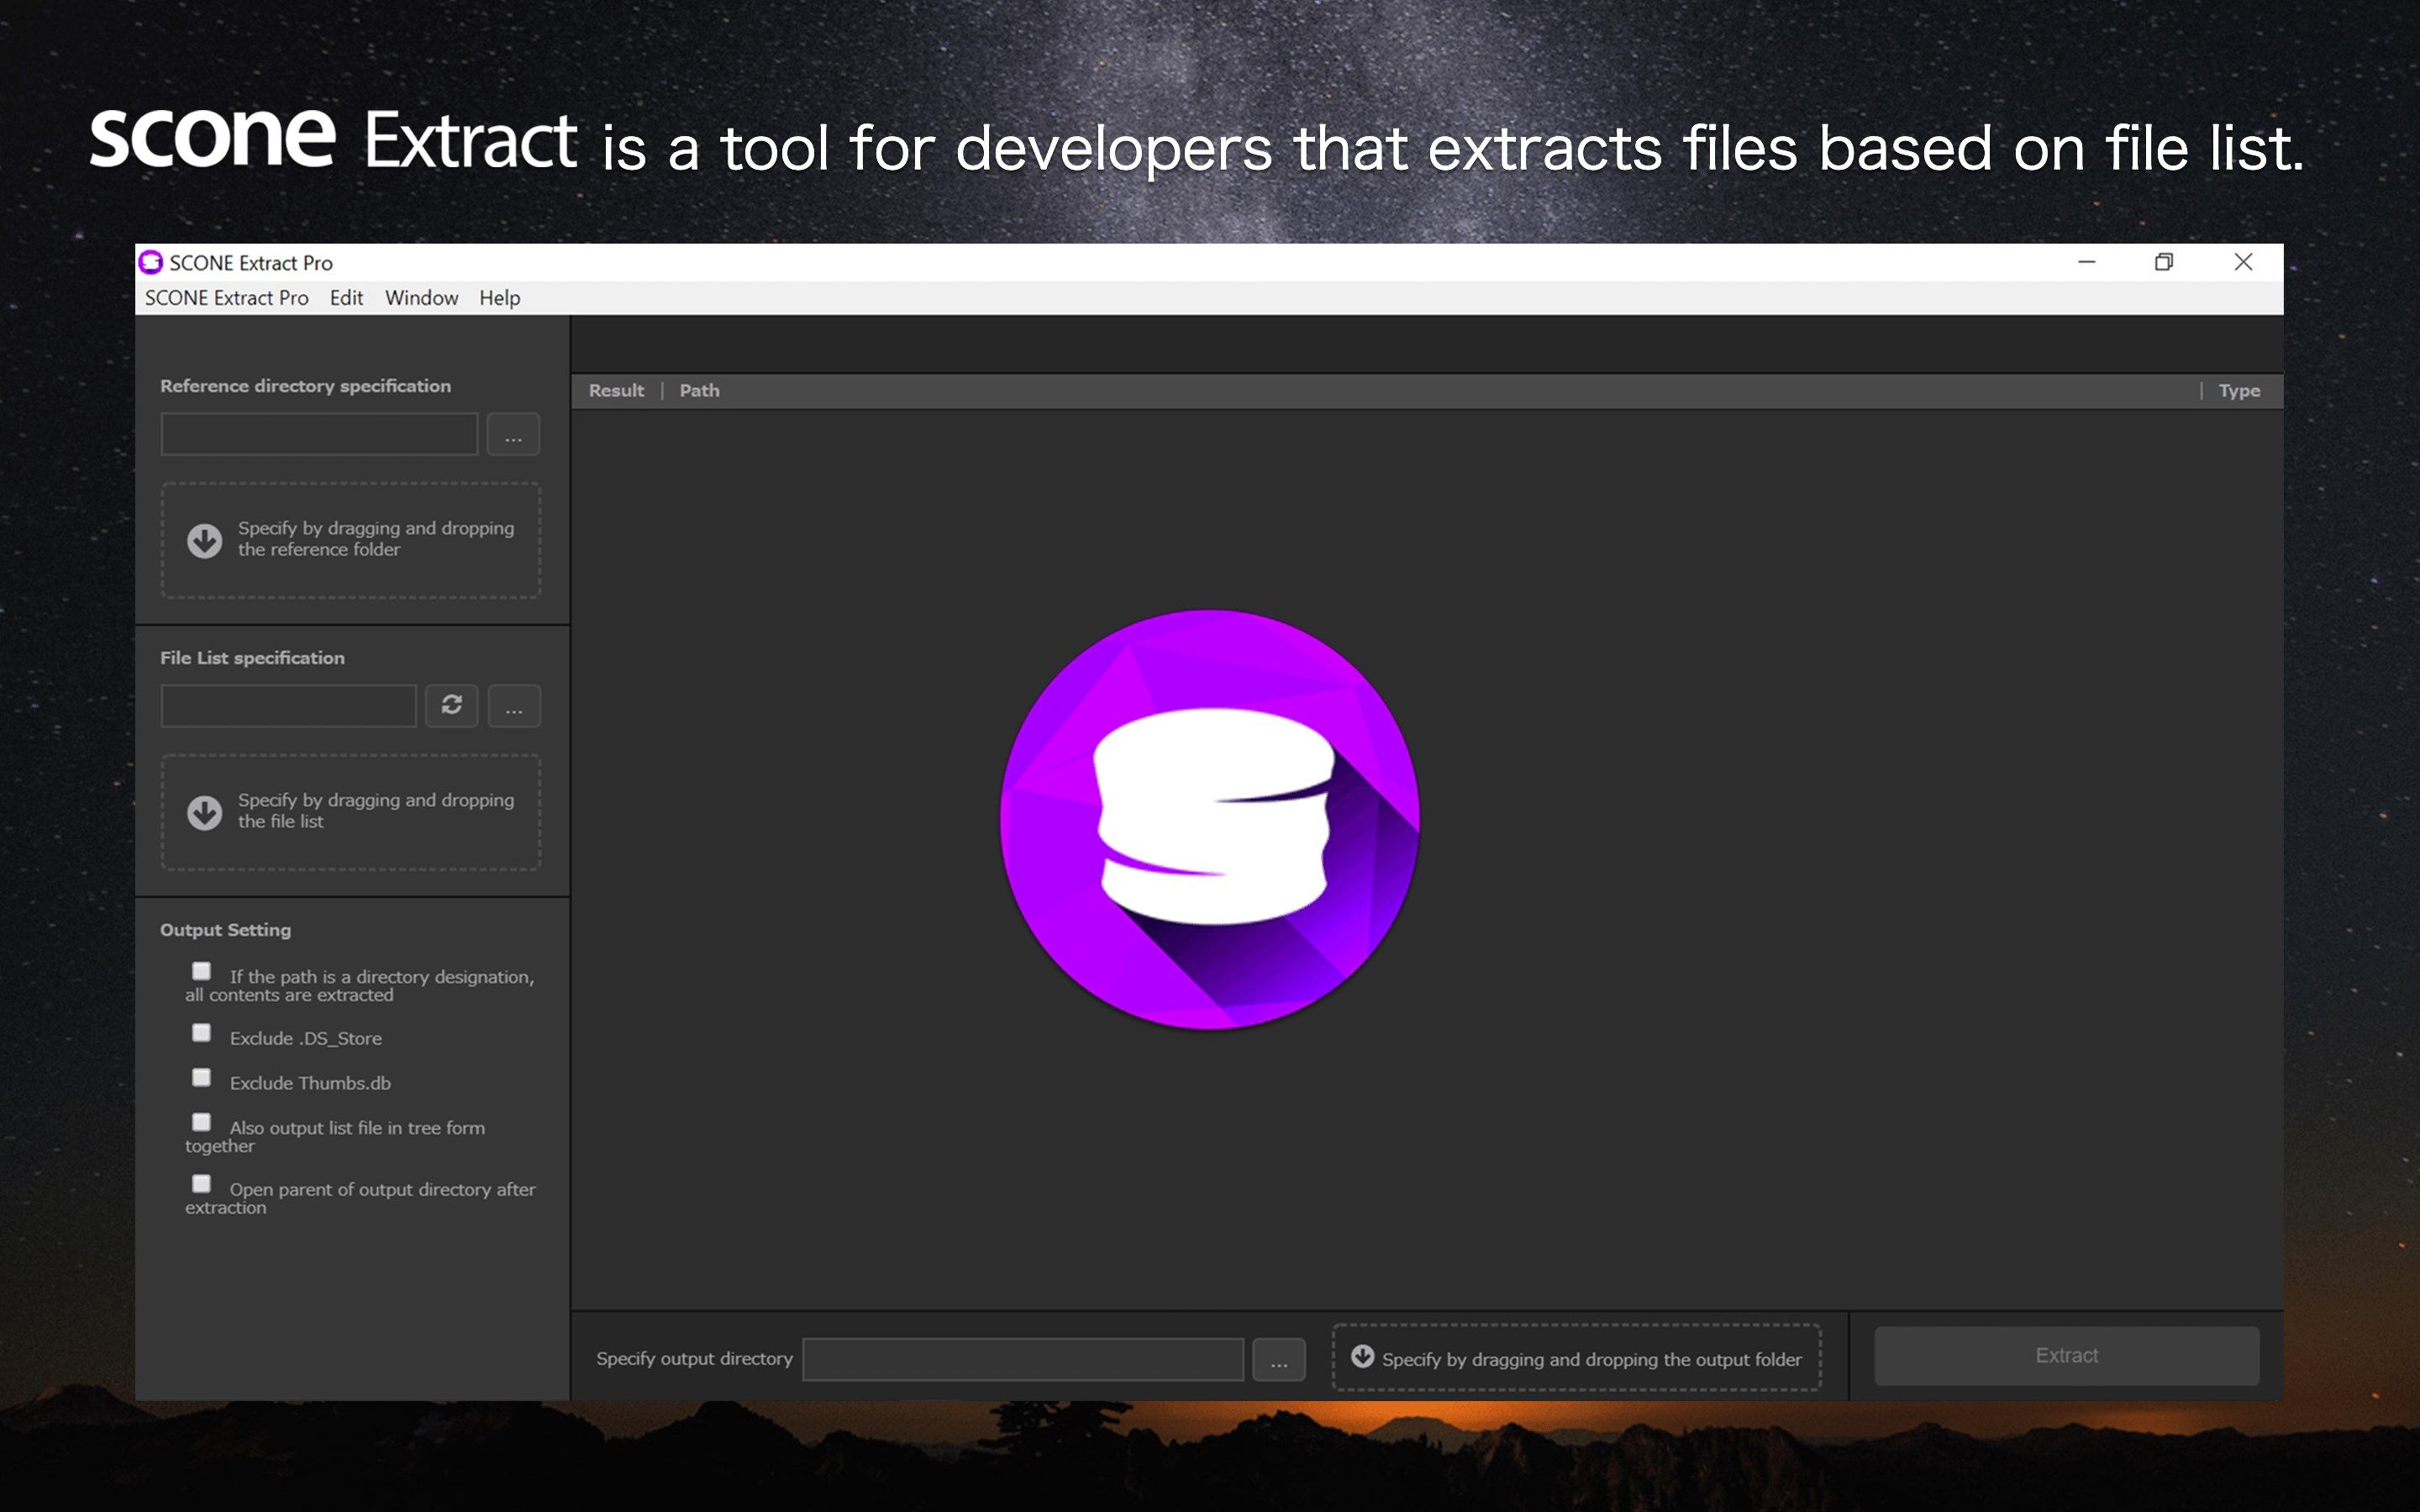 SCONE Extract is a tool for developers that extracts files based on file list.